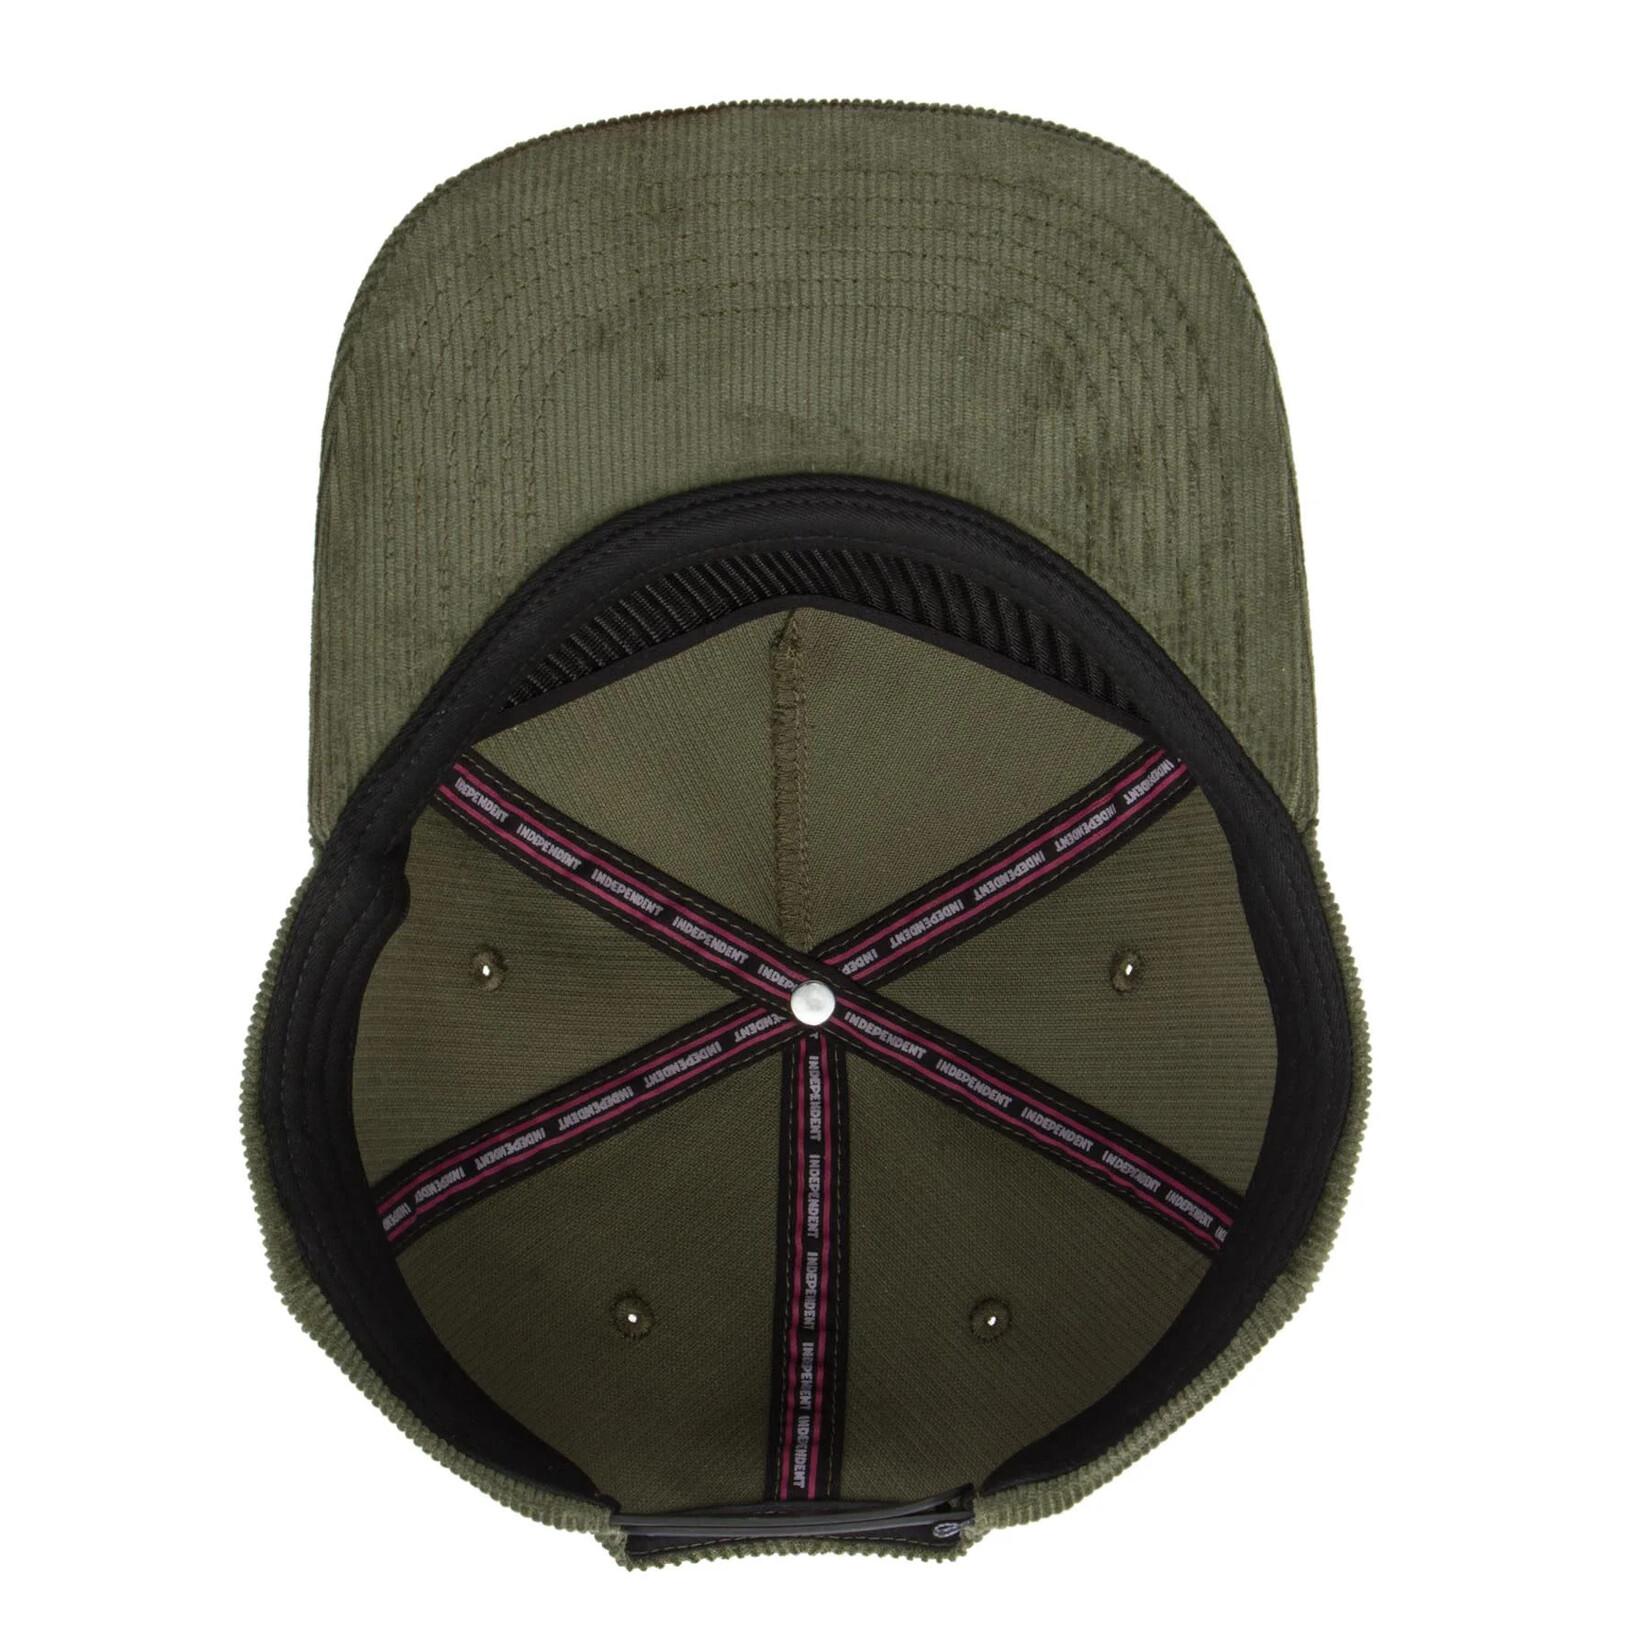 Independent Independent Beacon Snapback Hat - Olive